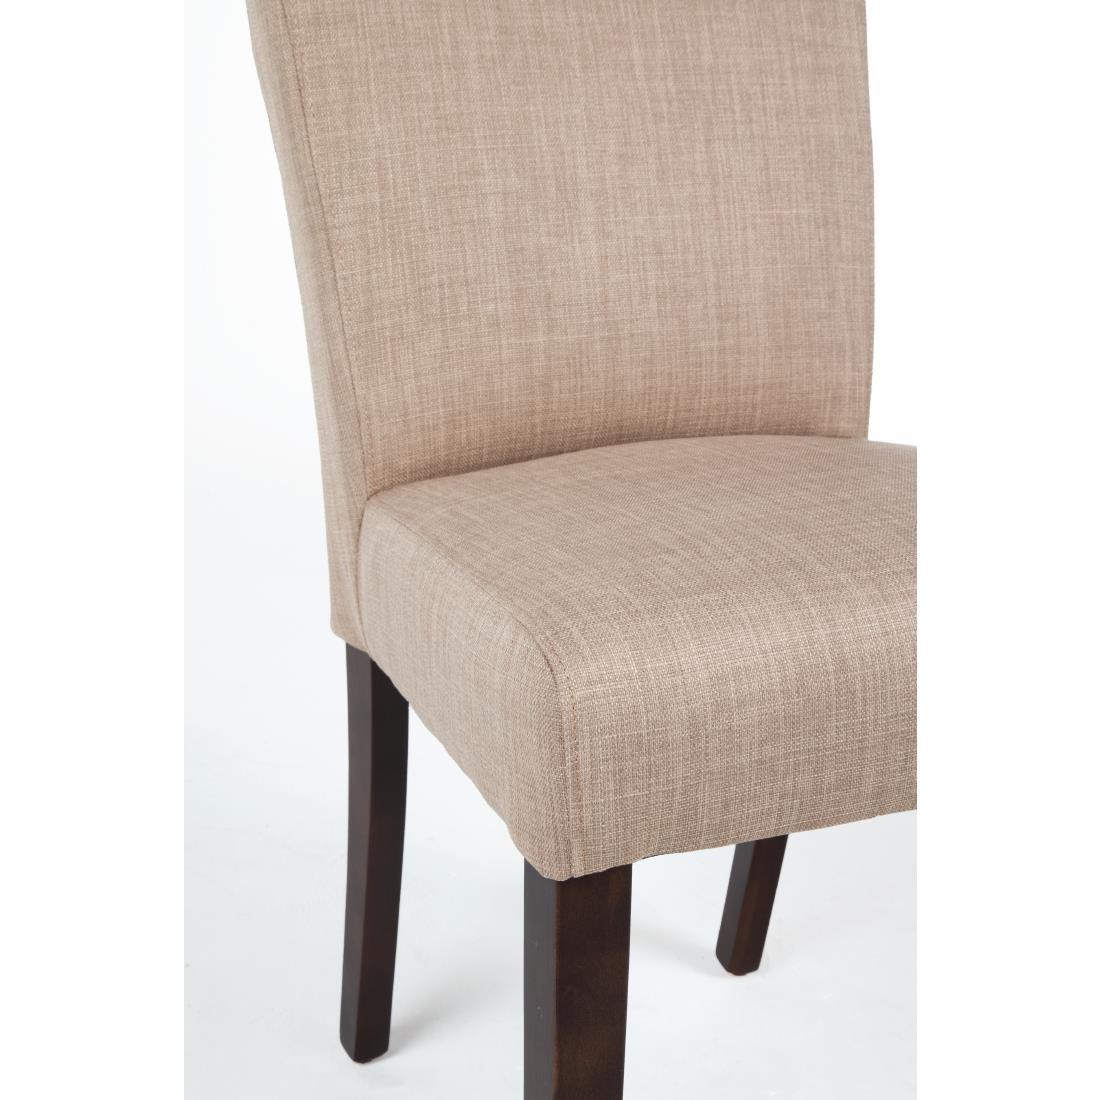 GR367 - Bolero Contemporary Dining Chair Natural (Pack 2) - GR367  - 6